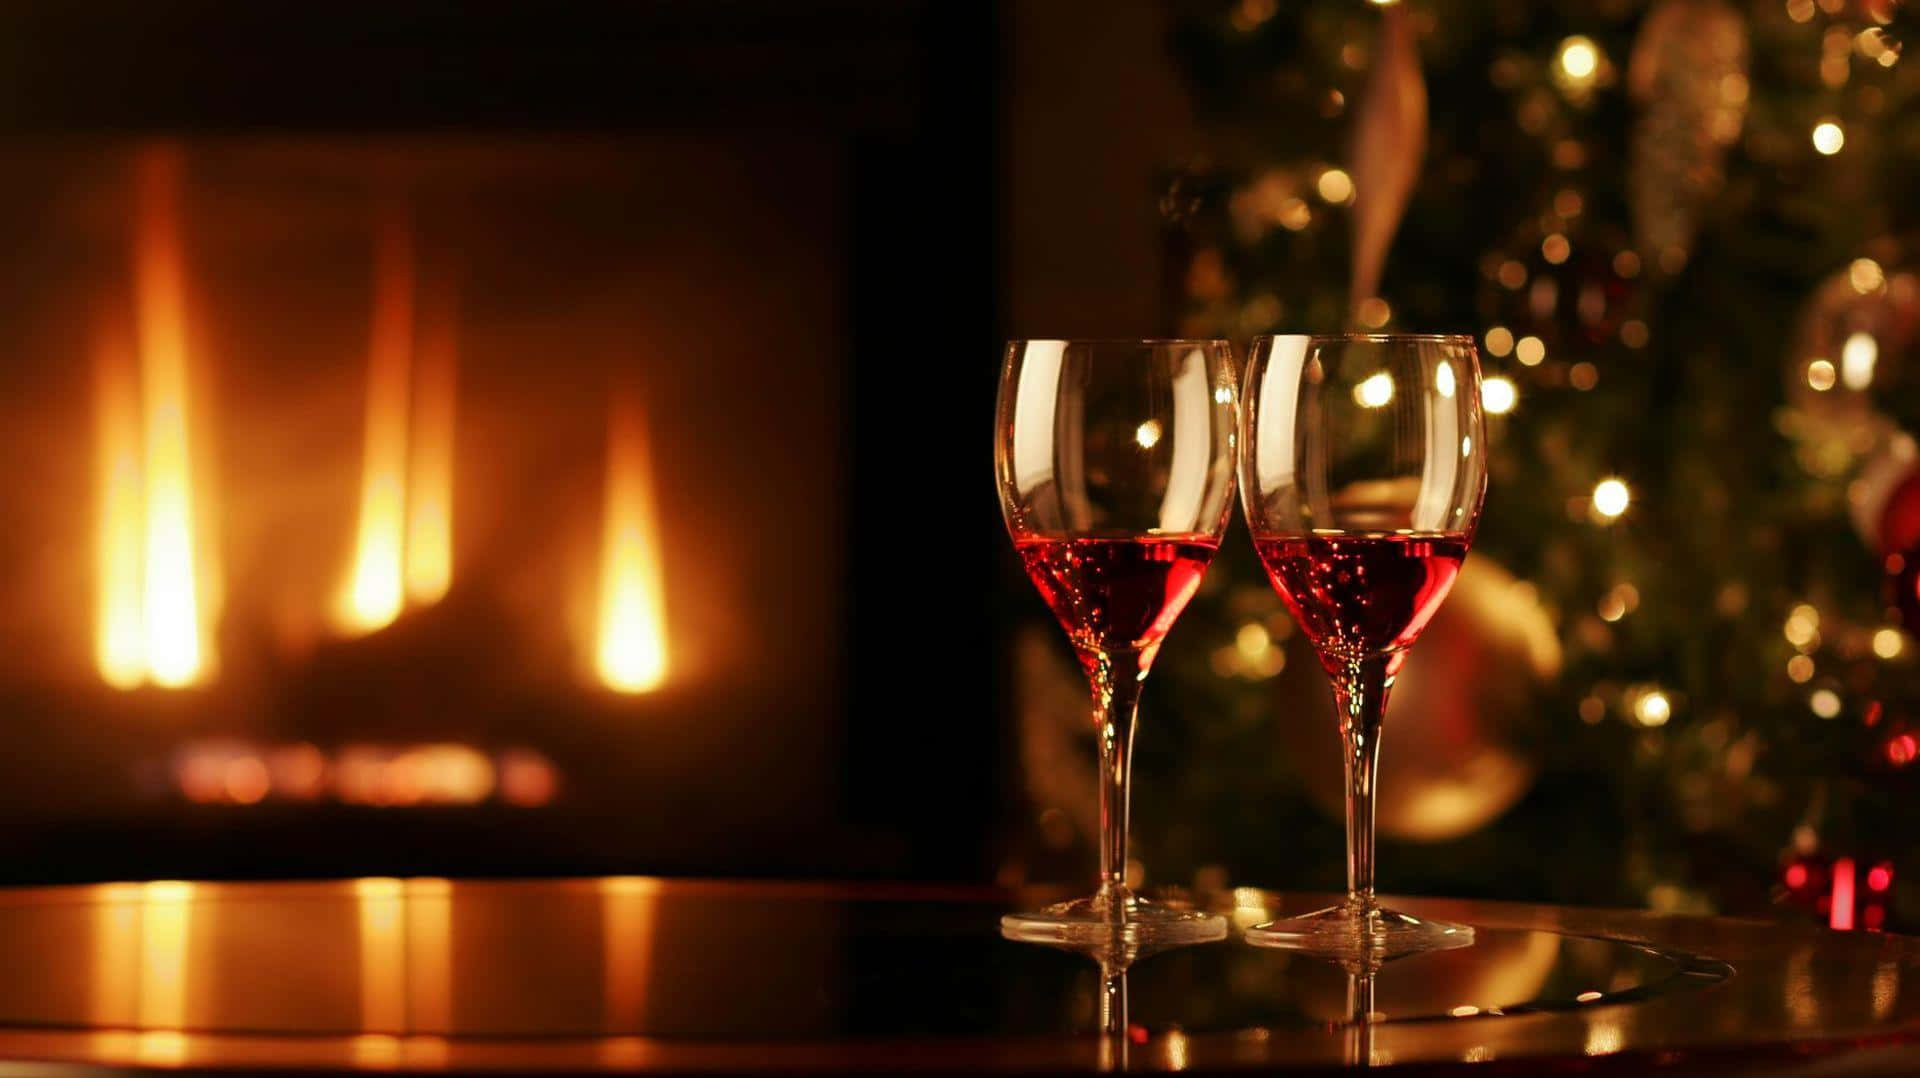 Two Glasses Of Wine In Front Of A Fireplace